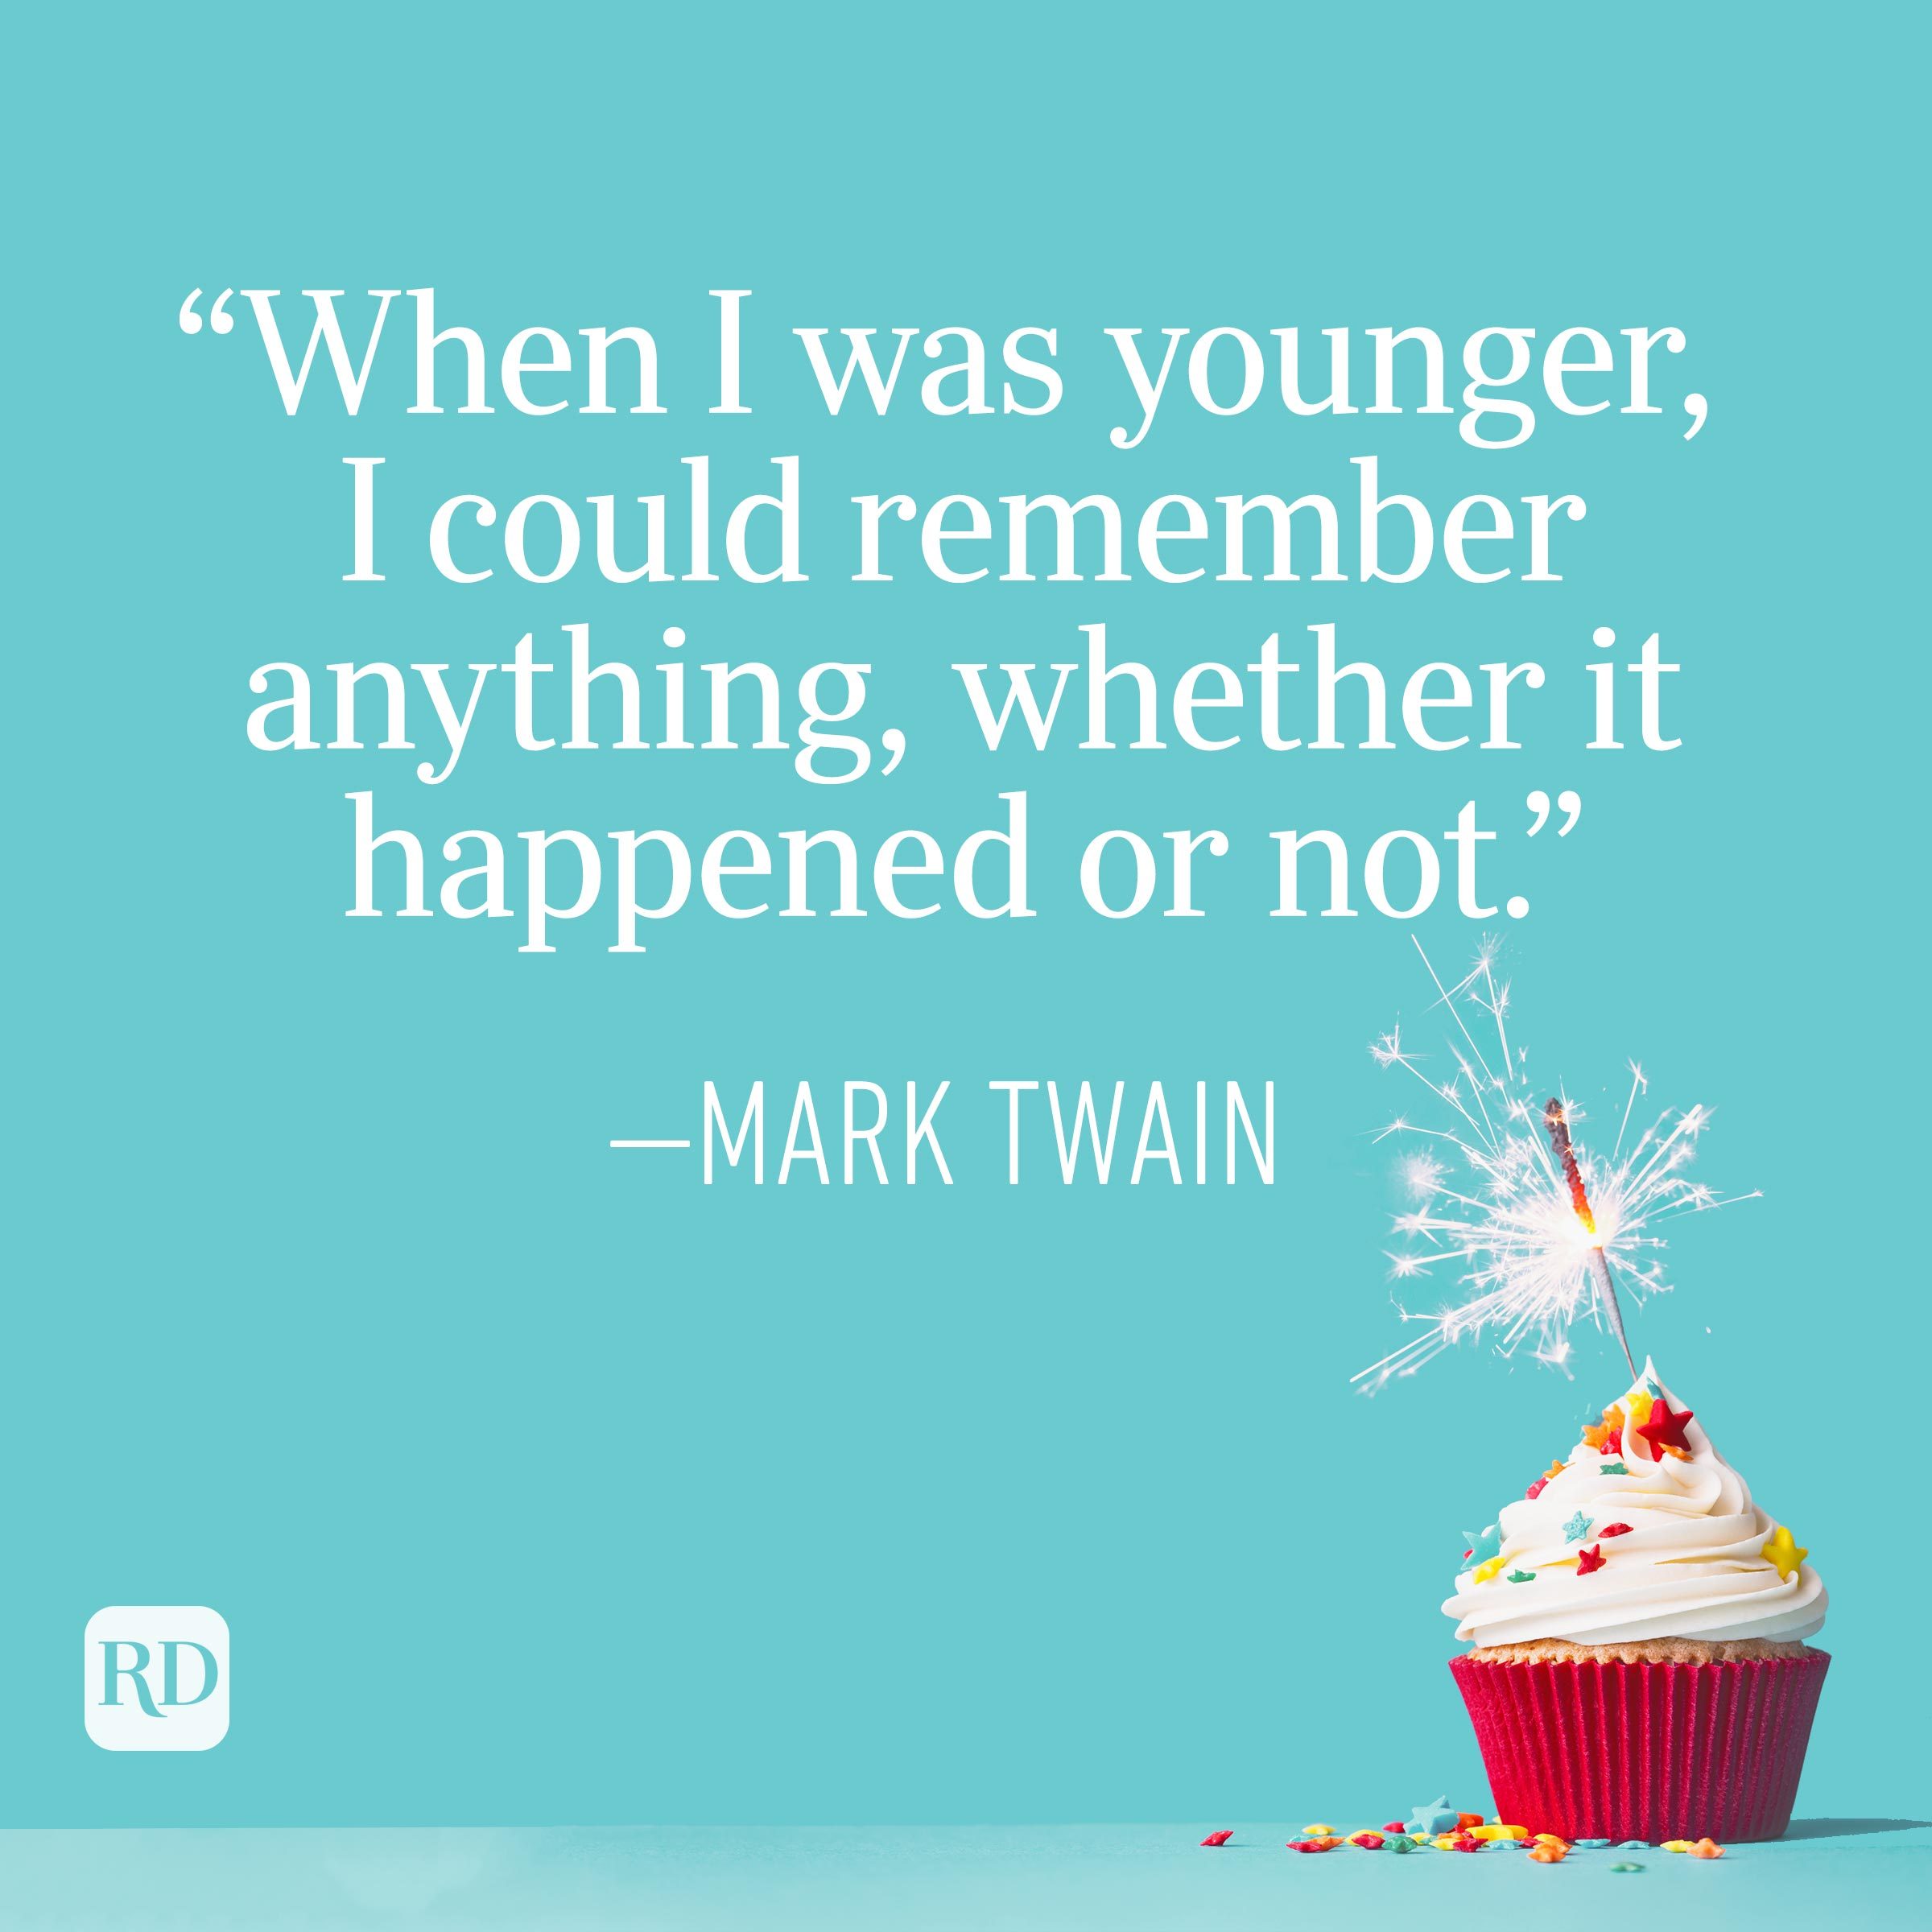 "When I was younger, I could remember anything, whether it happened or not." —Mark Twain